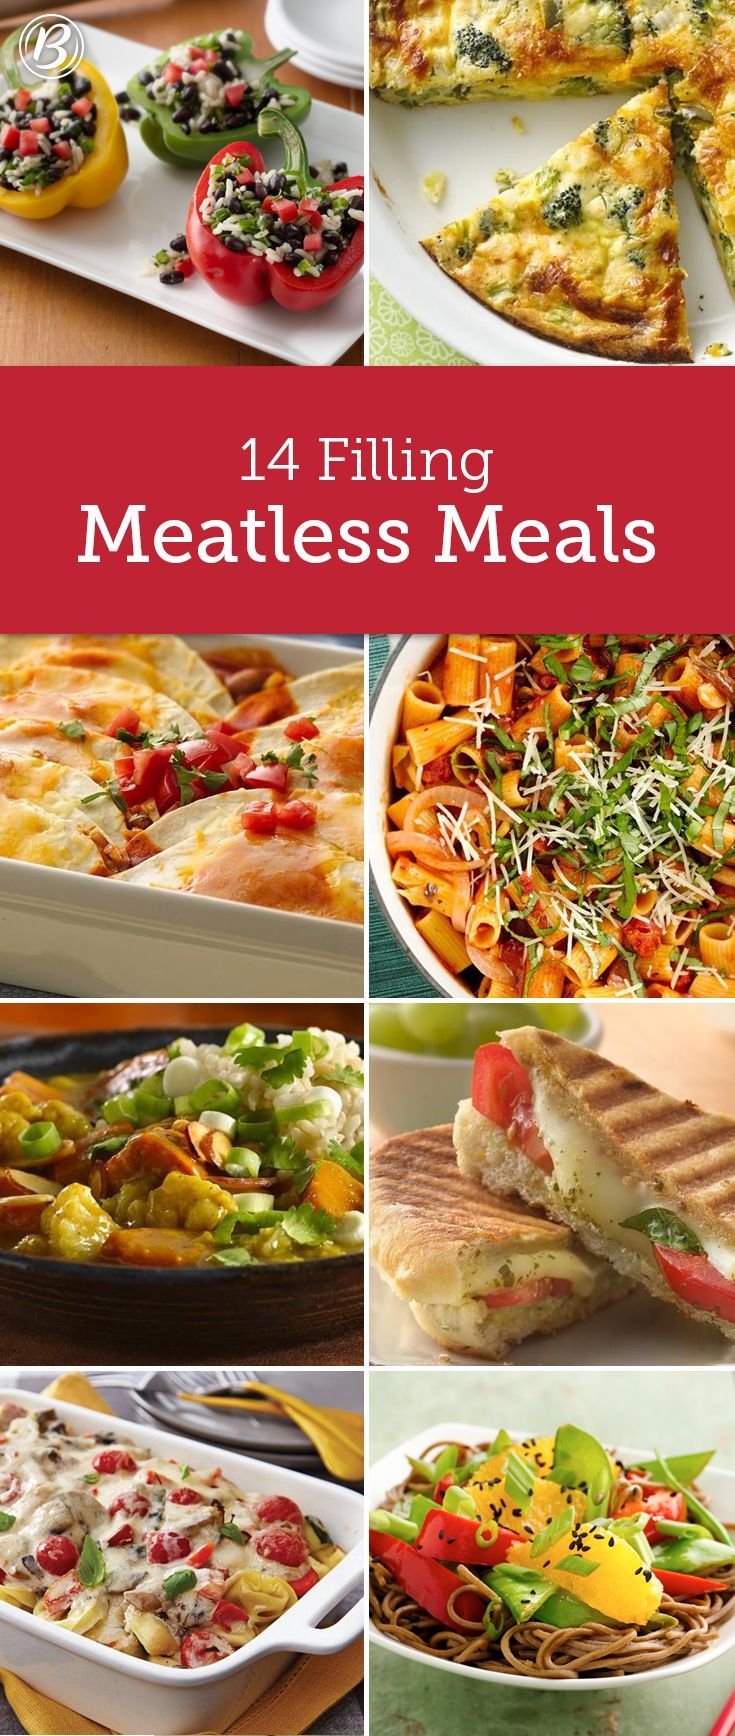 14 Filling Meals Made Without Meat -   7 no meat diet Meals ideas